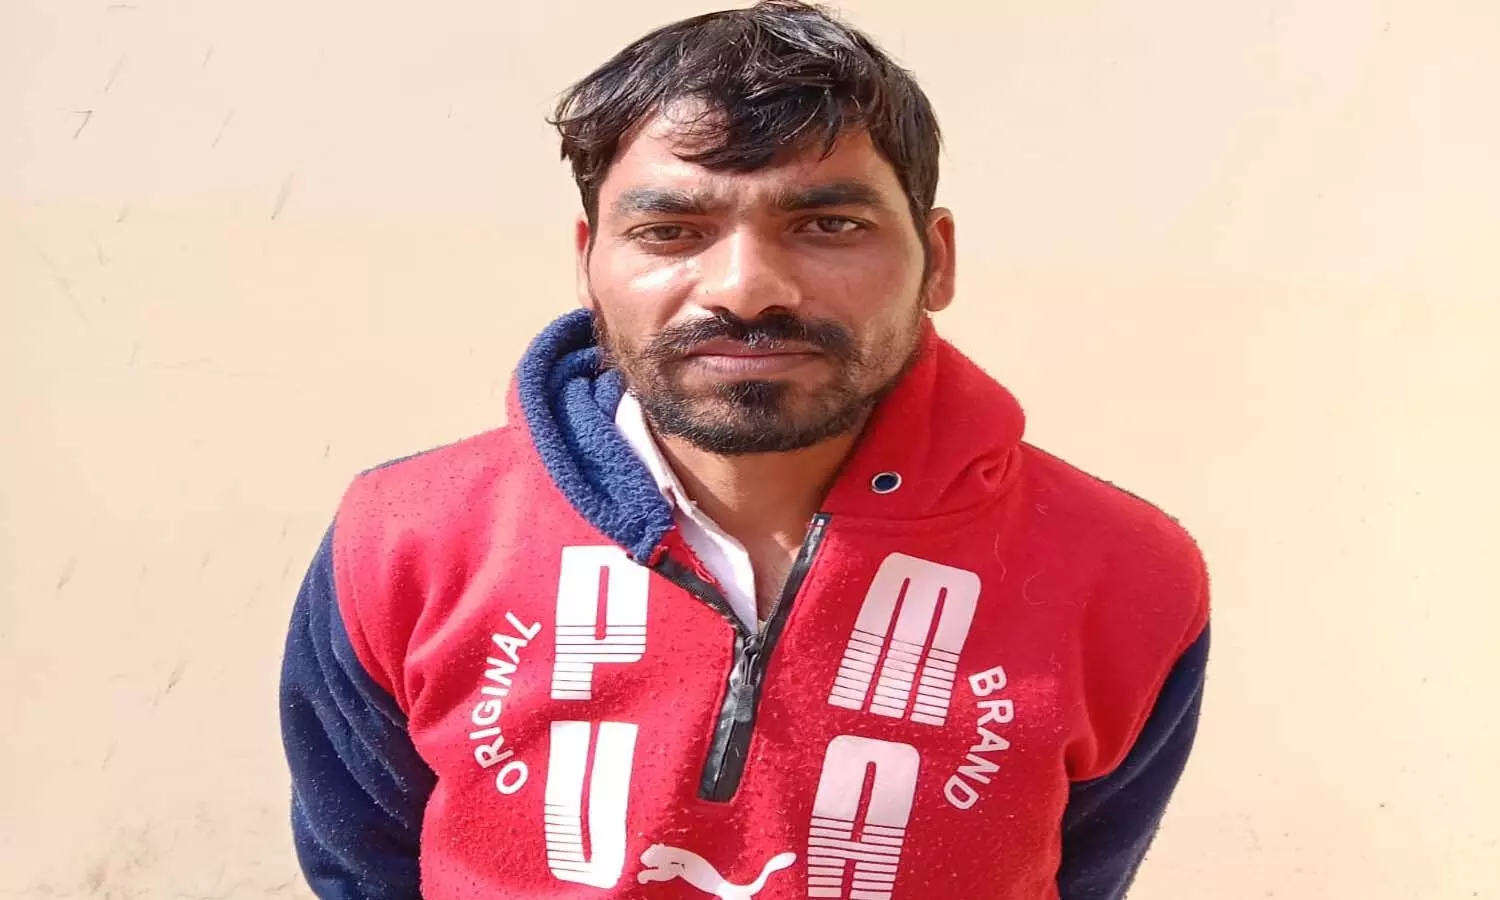 The killer of mother and sisters arrested in Hamirpur, confessed to the crime during police interrogation